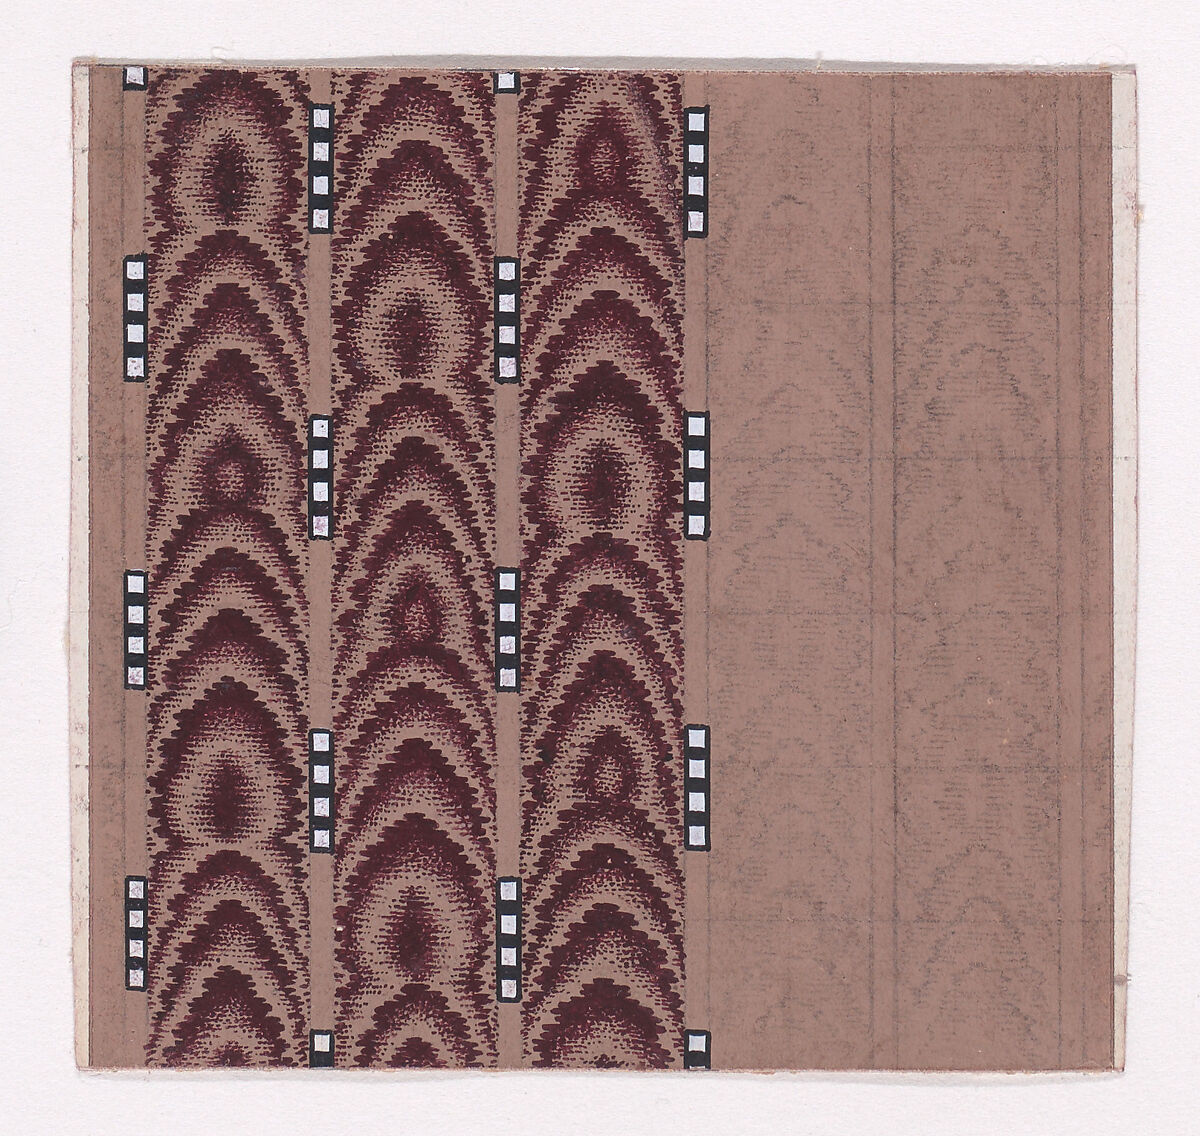 Textile Design of Vertical Stripes of Overlapping Scales Simulating Tie-Dye Framed by Alternating Vertical Strings of Squares, Anonymous, Alsatian, 19th century, Gouache 